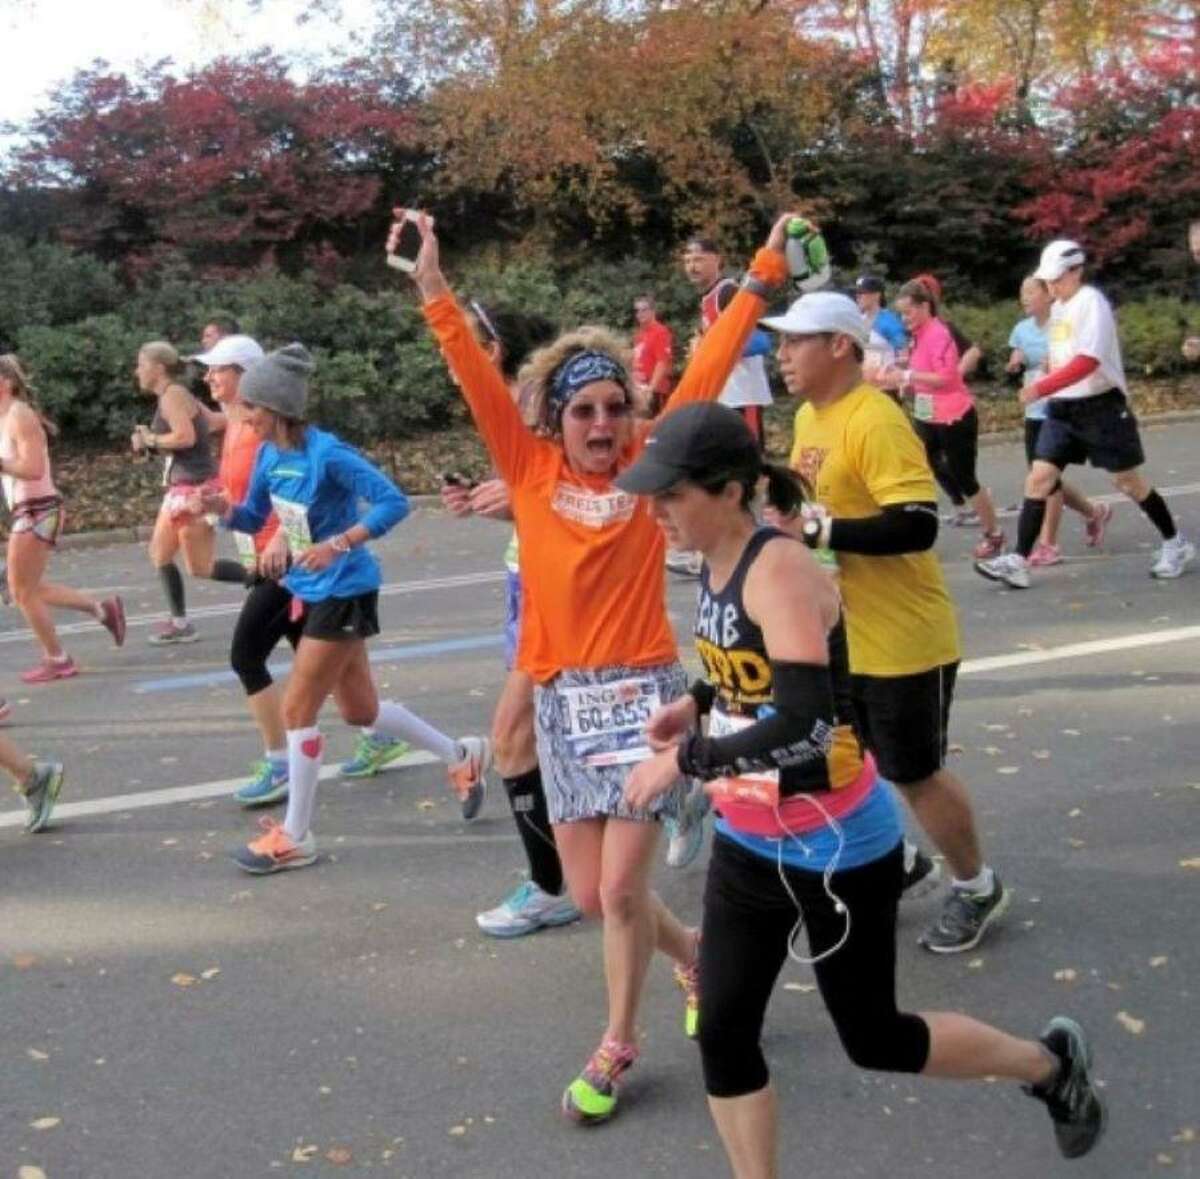 Ridgefield resident Claire Gladstone is preparing to run her 100th marathon in November. Pictured, Gladstone runs for Fred’s Team during the New York City Marathon in 2013.